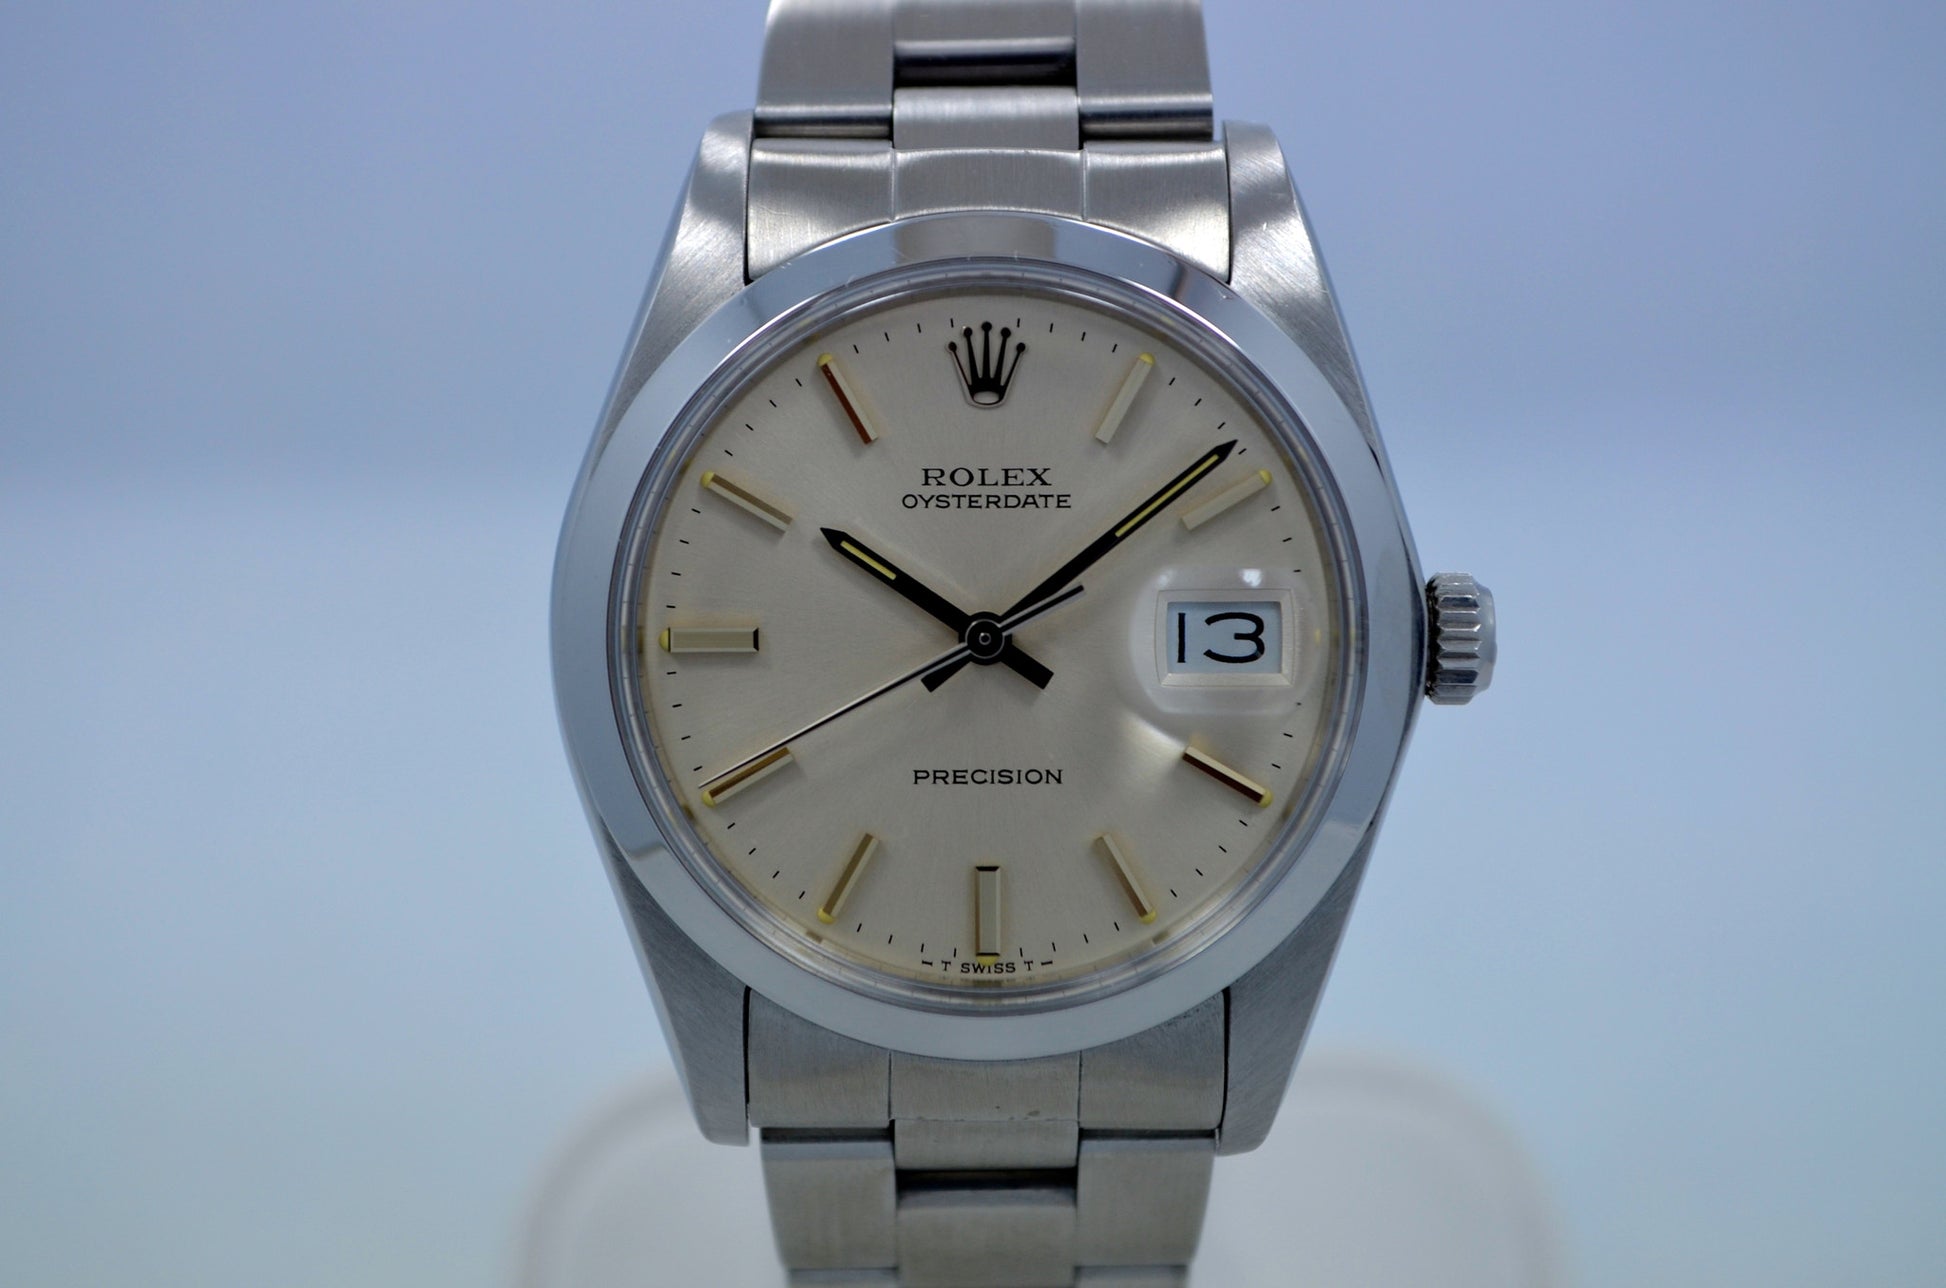 Vintage Rolex 6694 Oysterdate Stainless Steel Wristwatch Circa 1983 8 Mil Serial - Hashtag Watch Company